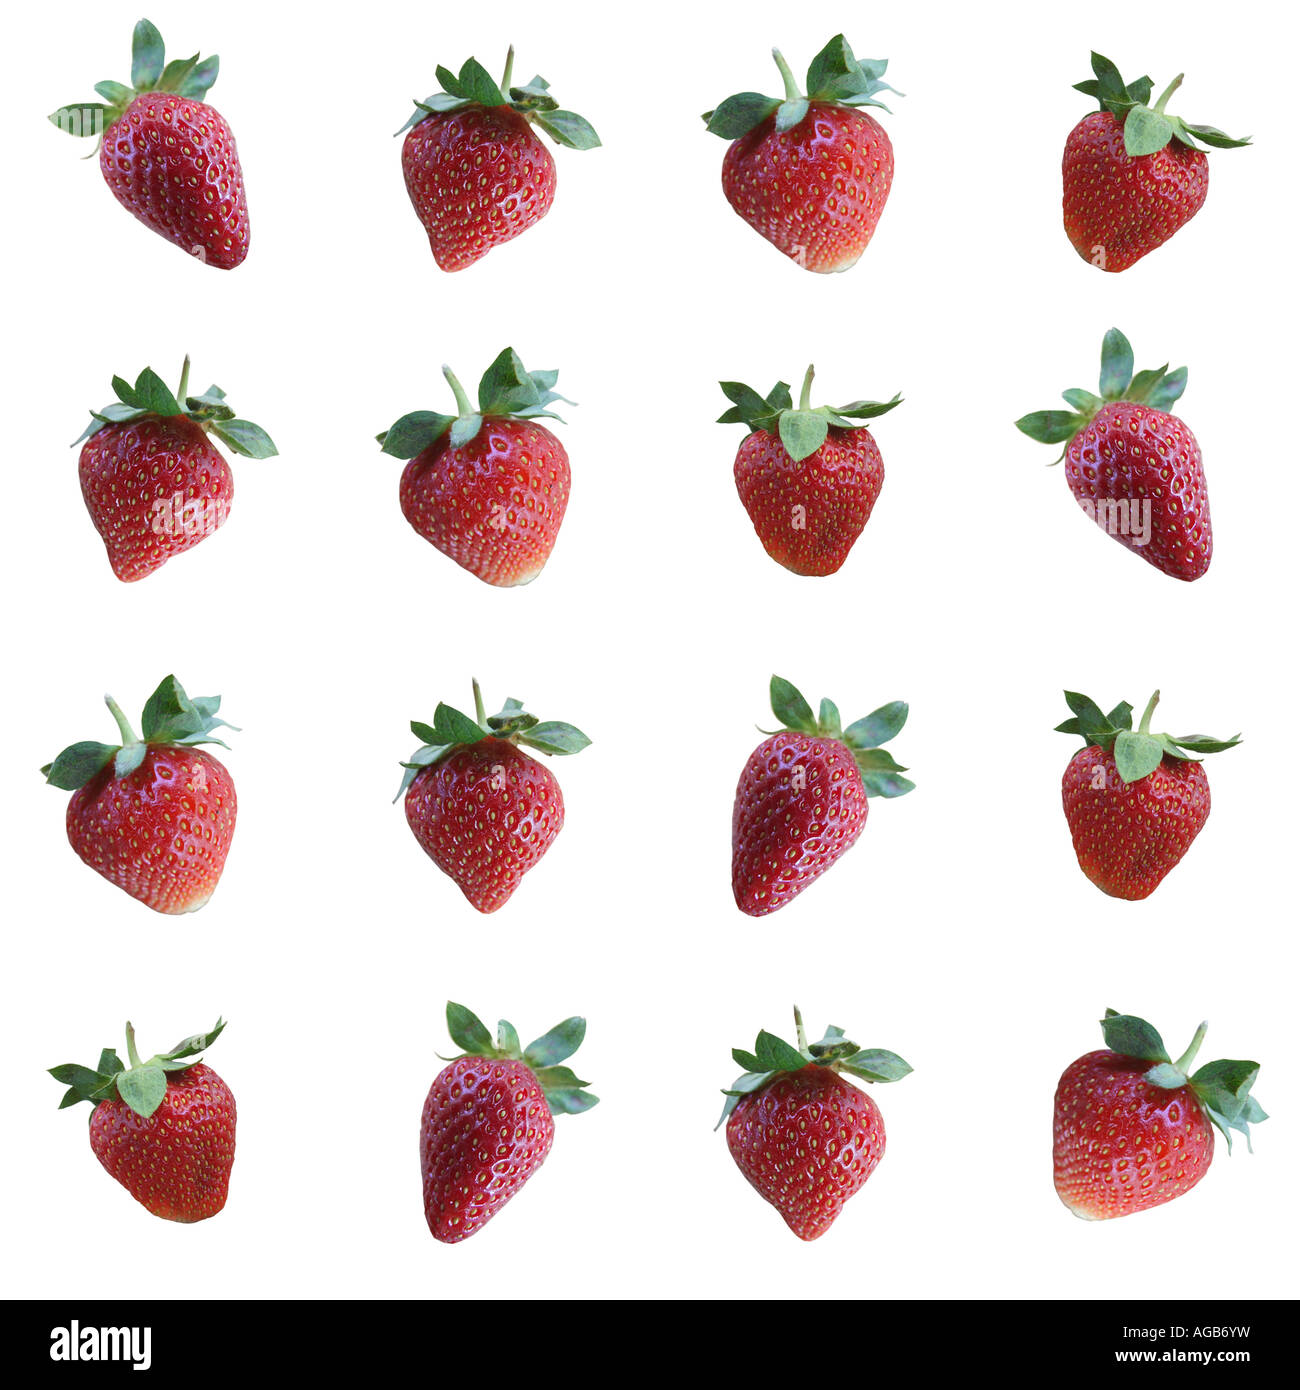 Strawberries arranged in rows. Stock Photo